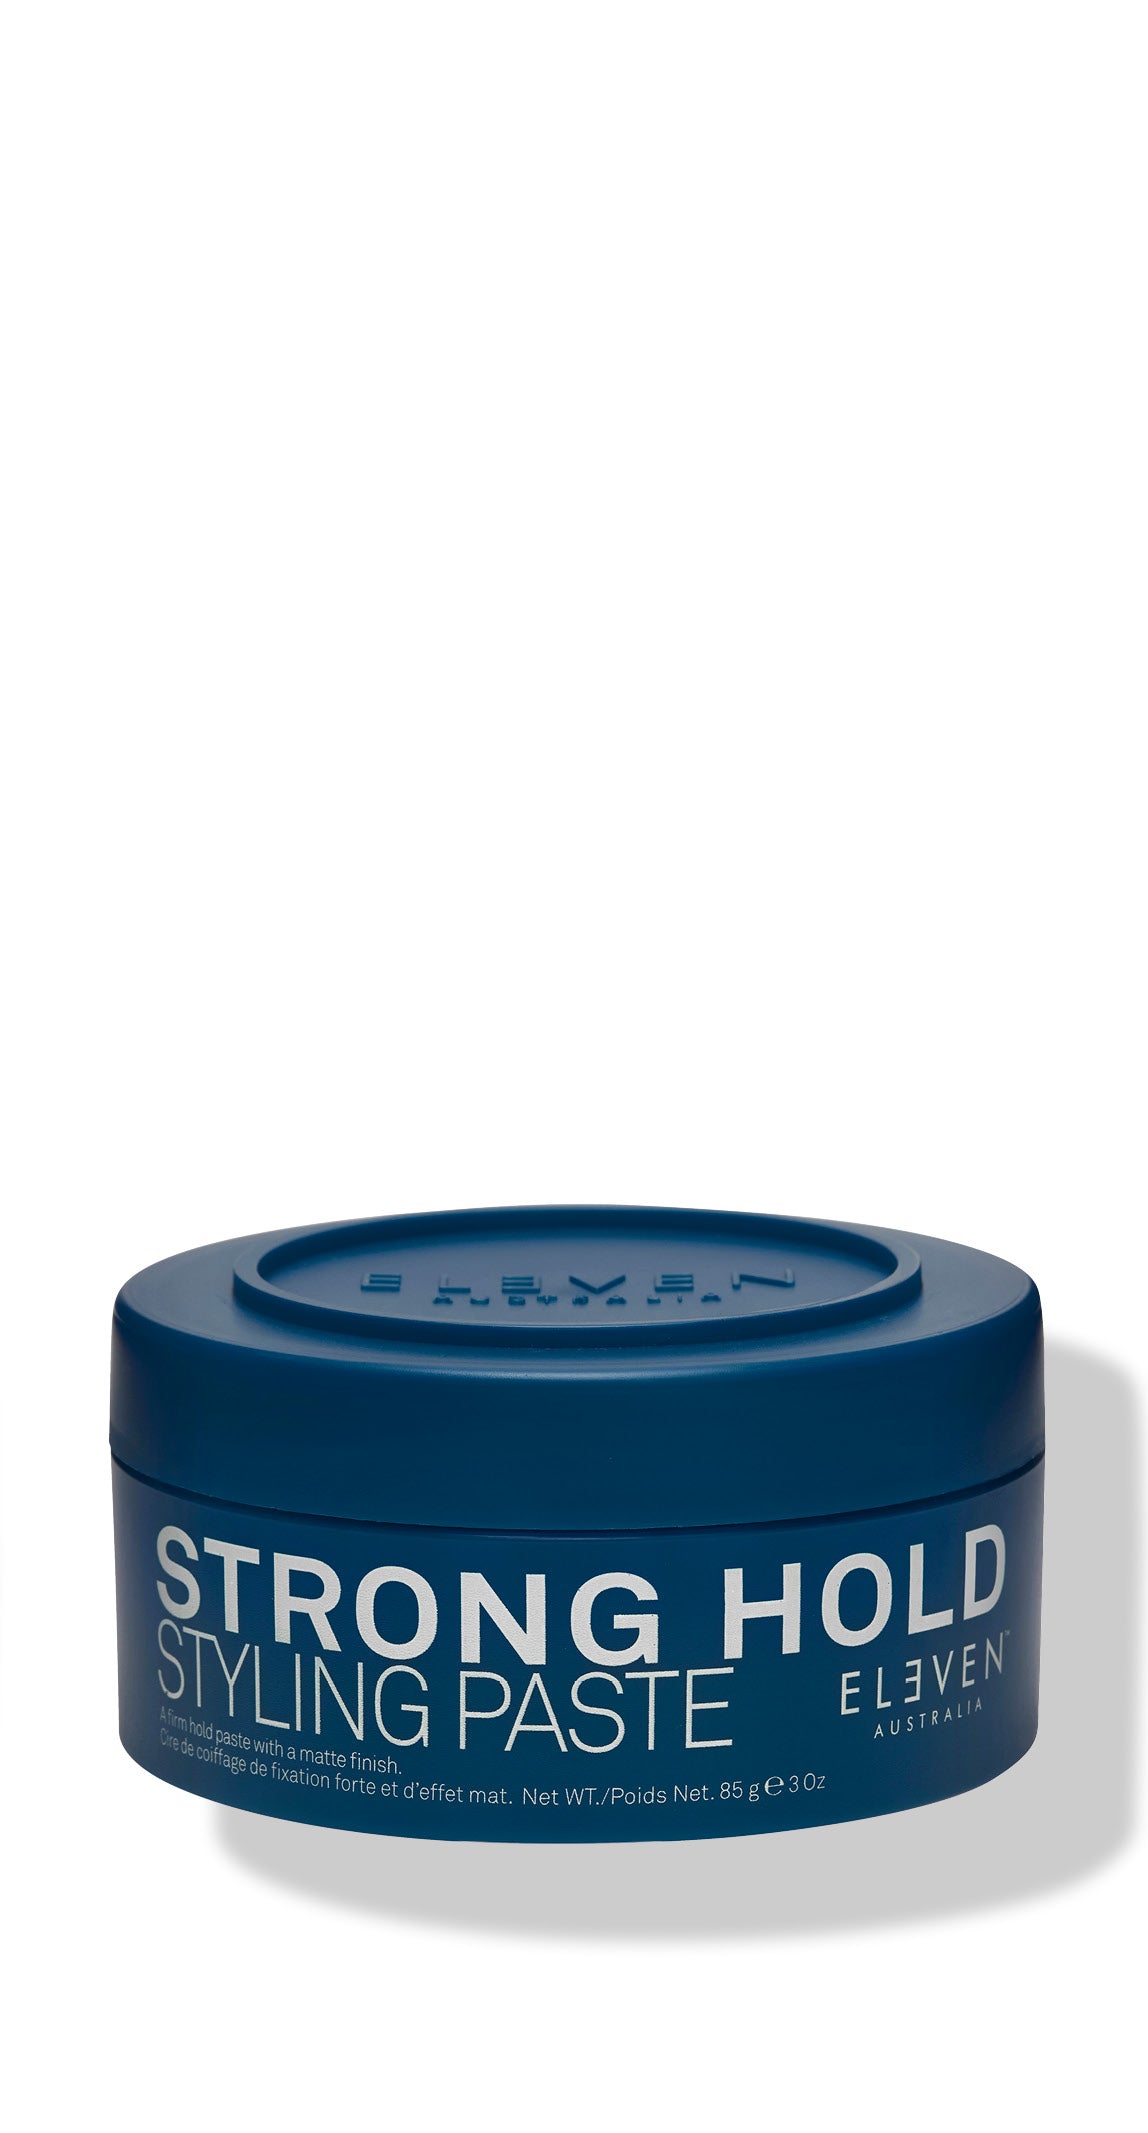 STRONG HOLD STYLING PASTE is a balanced blend of lightweight ingredients to give all-day hold. The product maintains a firm hold and texture through a blend of Beeswax, Castor Seed Oil and PVP. Perfect for structured, short hair styling.